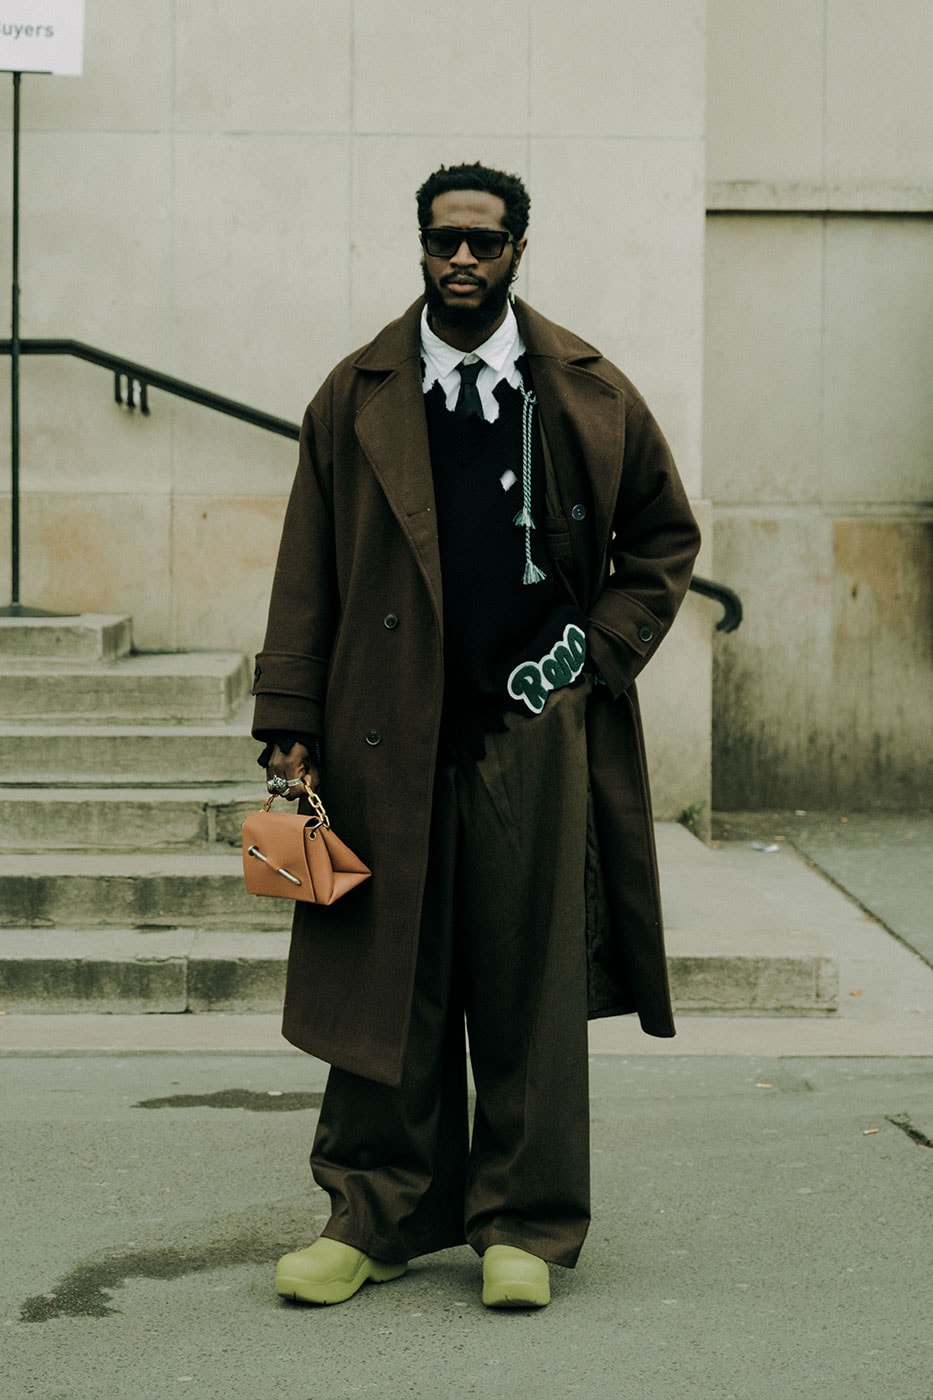 Paris Fashion Week FW22 Street Style Ends on a Bold Accessories and Accented Details fall/winter 2022 tyler the creator kanye west julia fox kenzo nigo louis vuitton dior pharrell